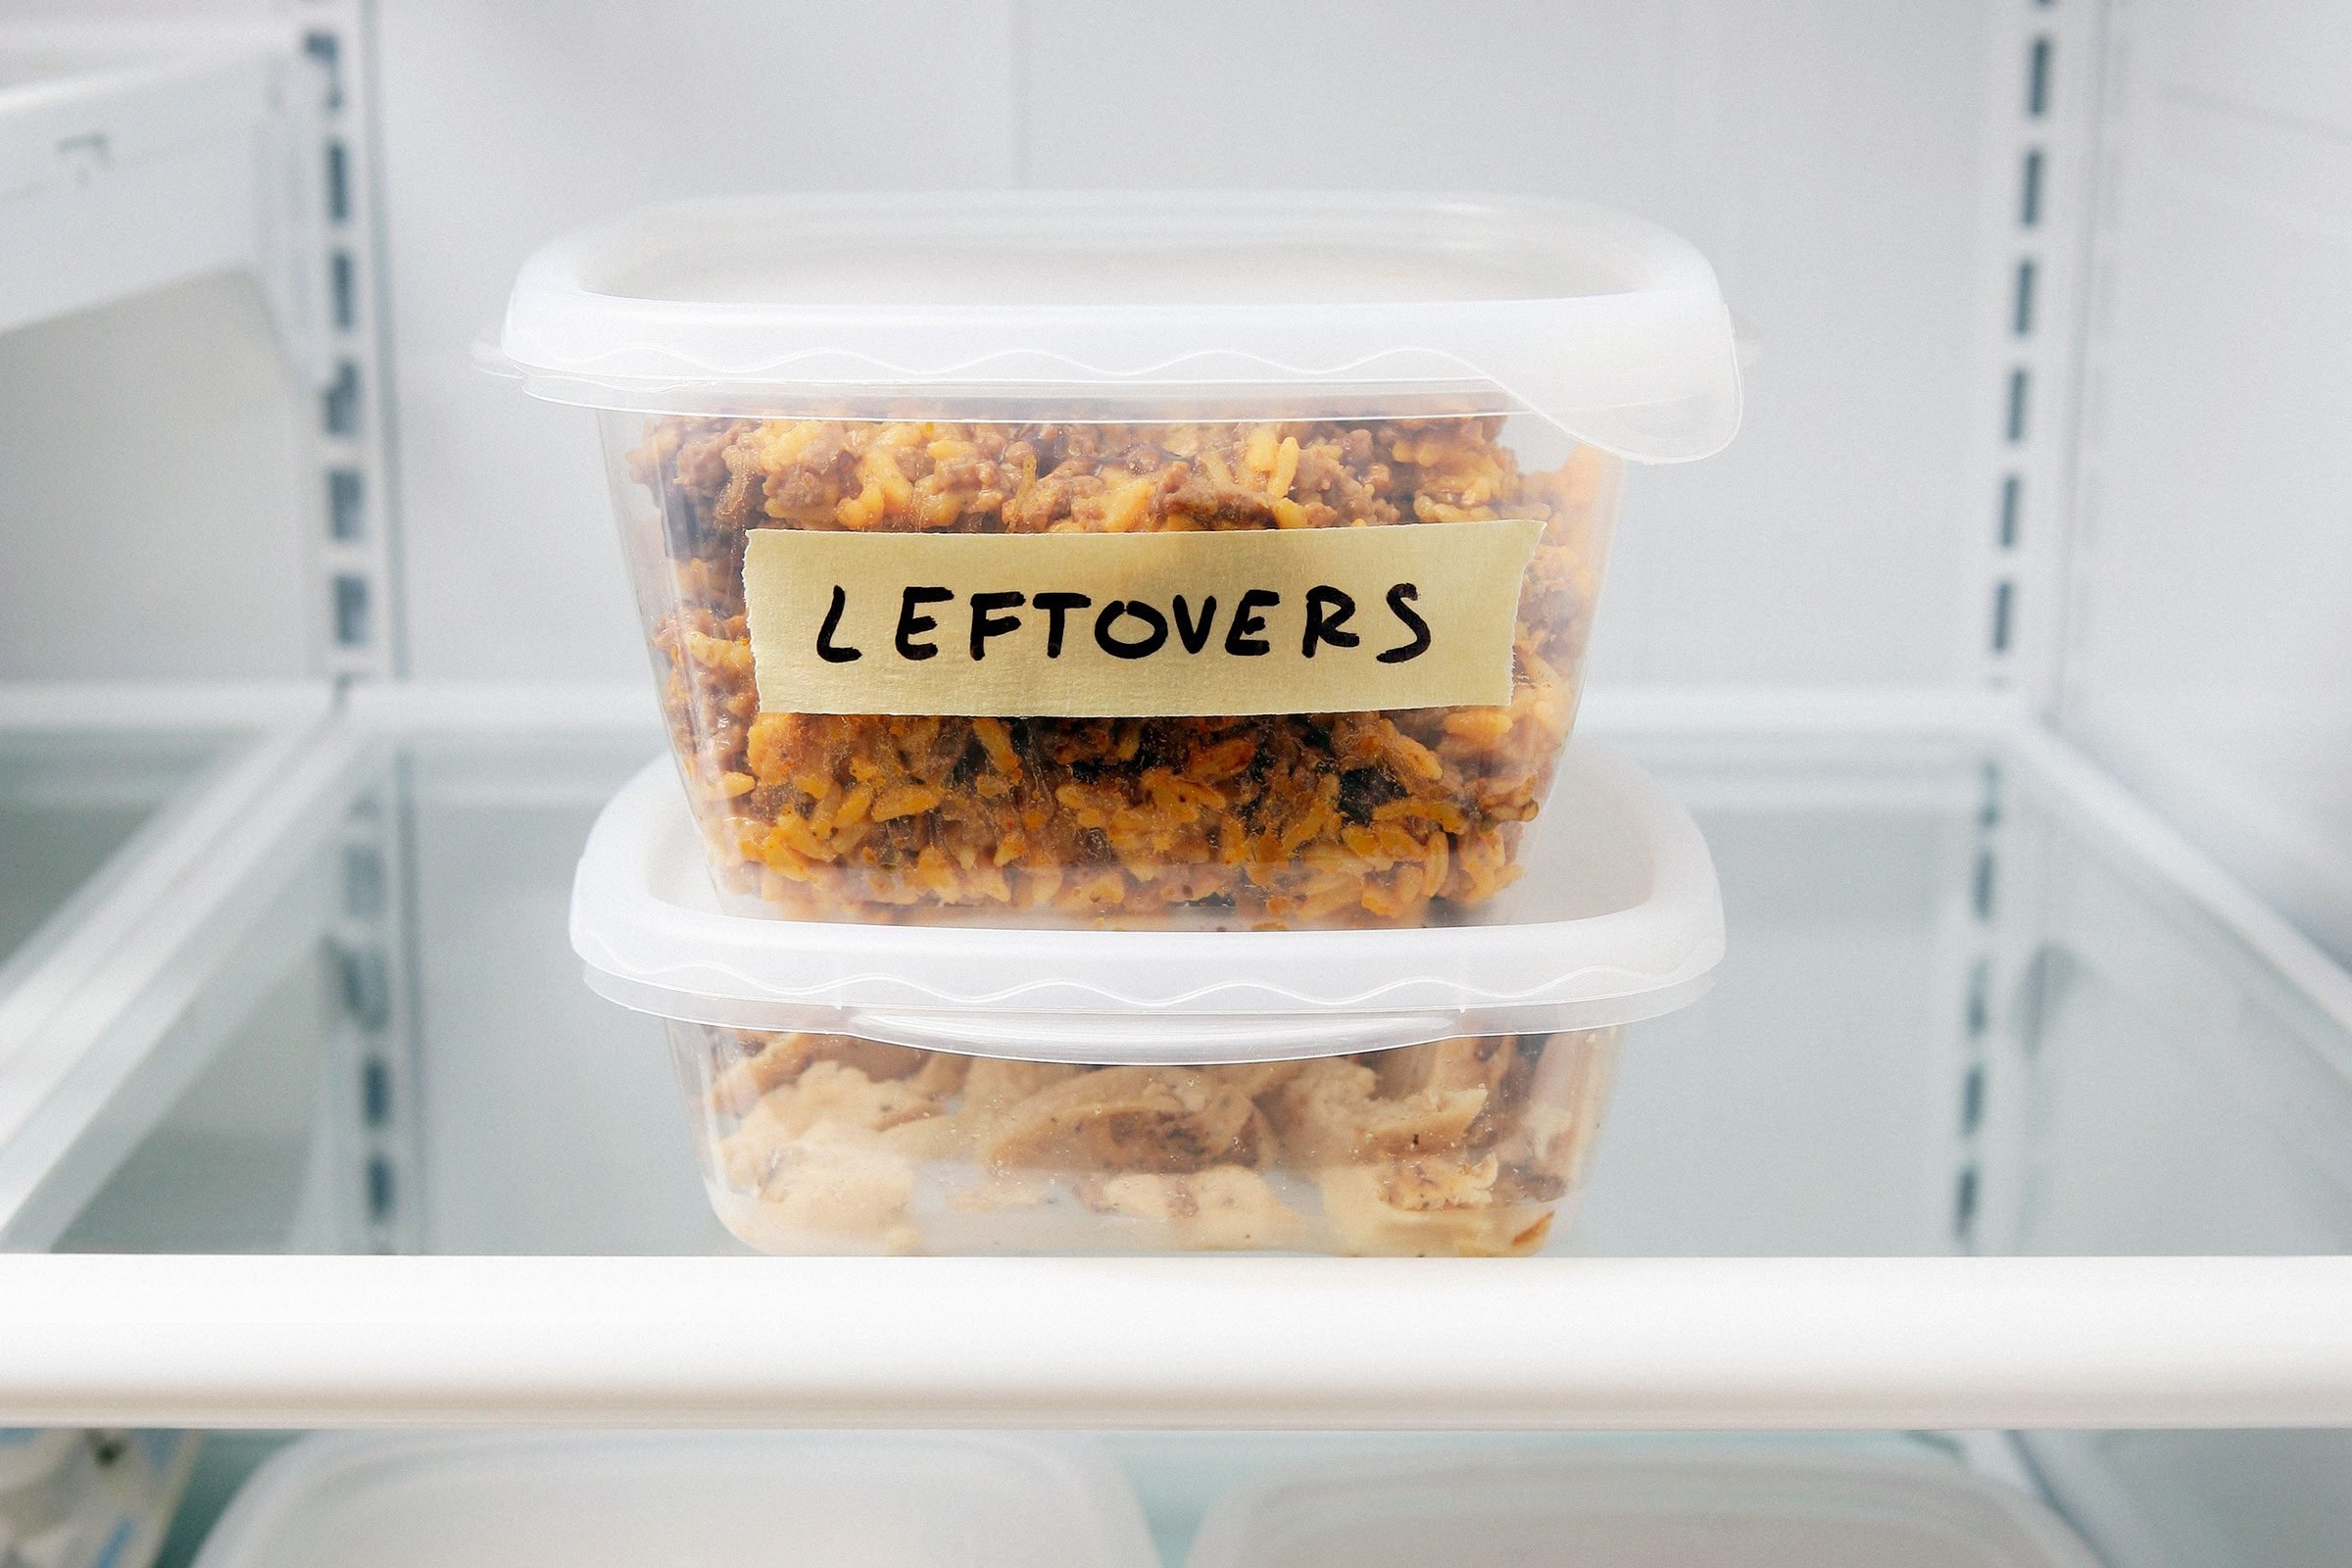 How Long Can Leftovers Last In The Fridge And Freezer? | Trusted Since 1922